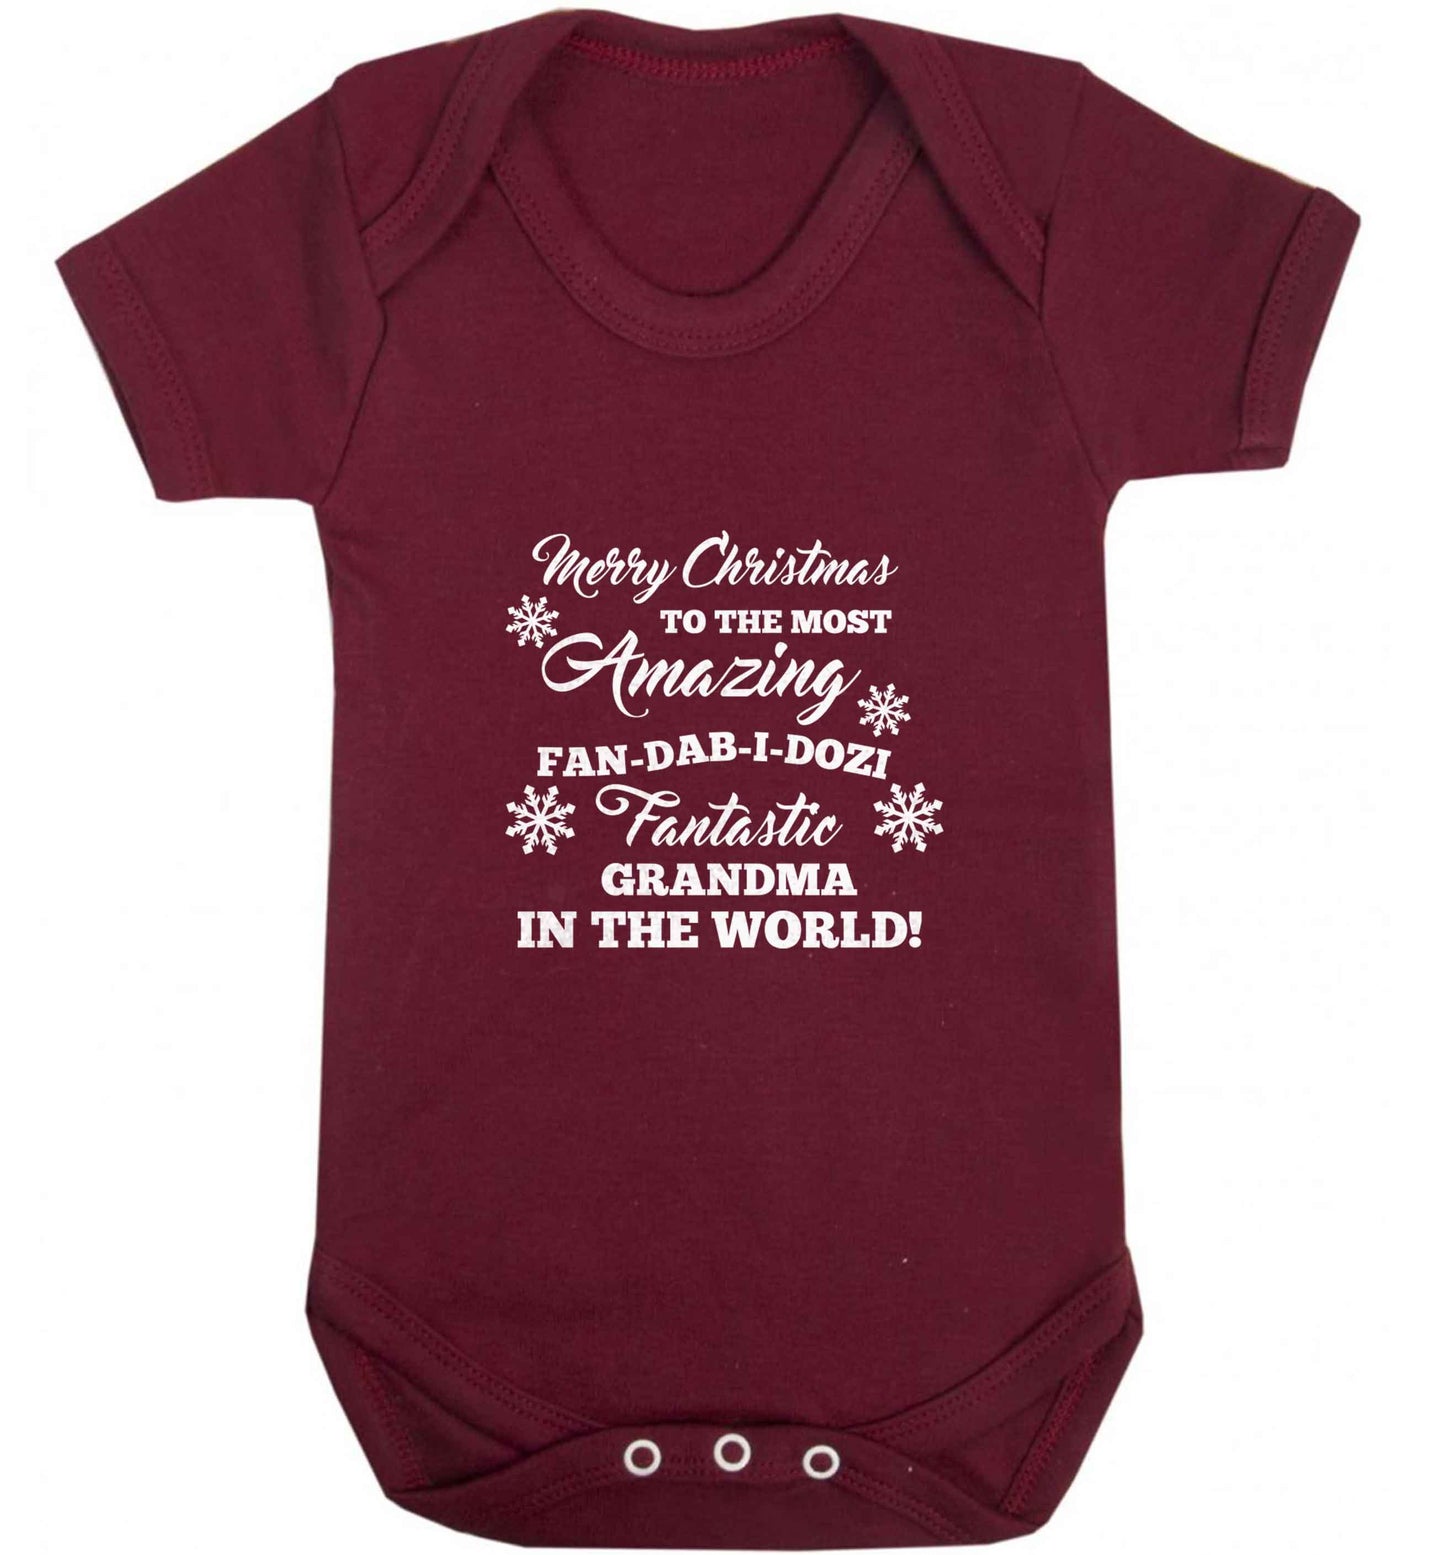 Merry Christmas to the most amazing fan-dab-i-dozi fantasic Grandma in the world baby vest maroon 18-24 months